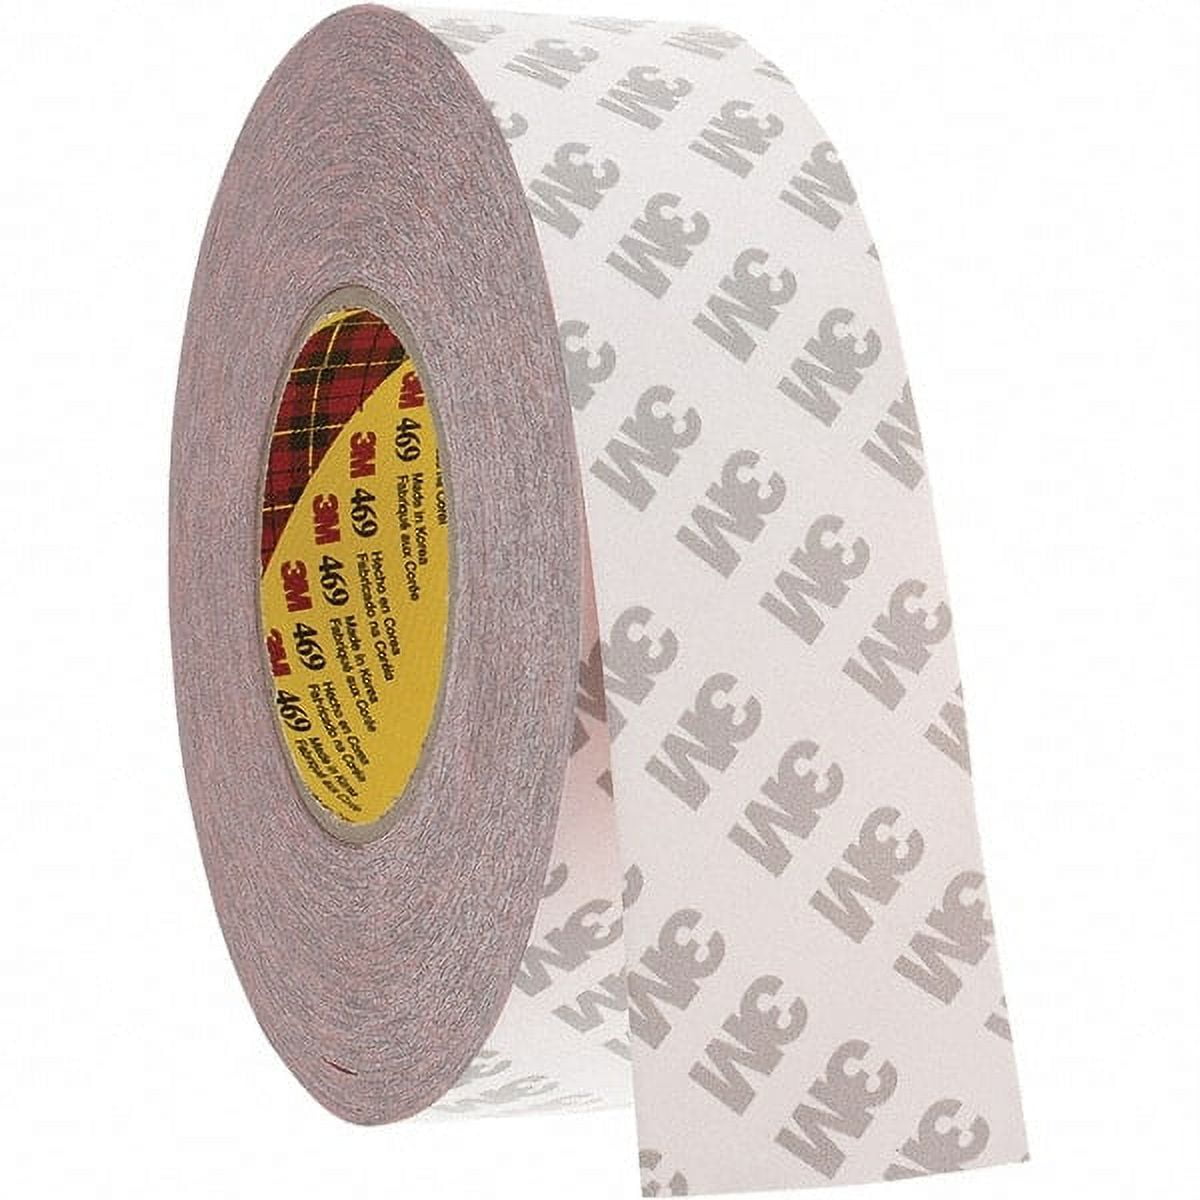 Phinus Double Sided Tape 2 Pack Heavy Duty, (3/4 Width, Total 20 FT) Clear  Adhesive Waterproof Removable Double Sided Mounting Tape for Carpet Fix